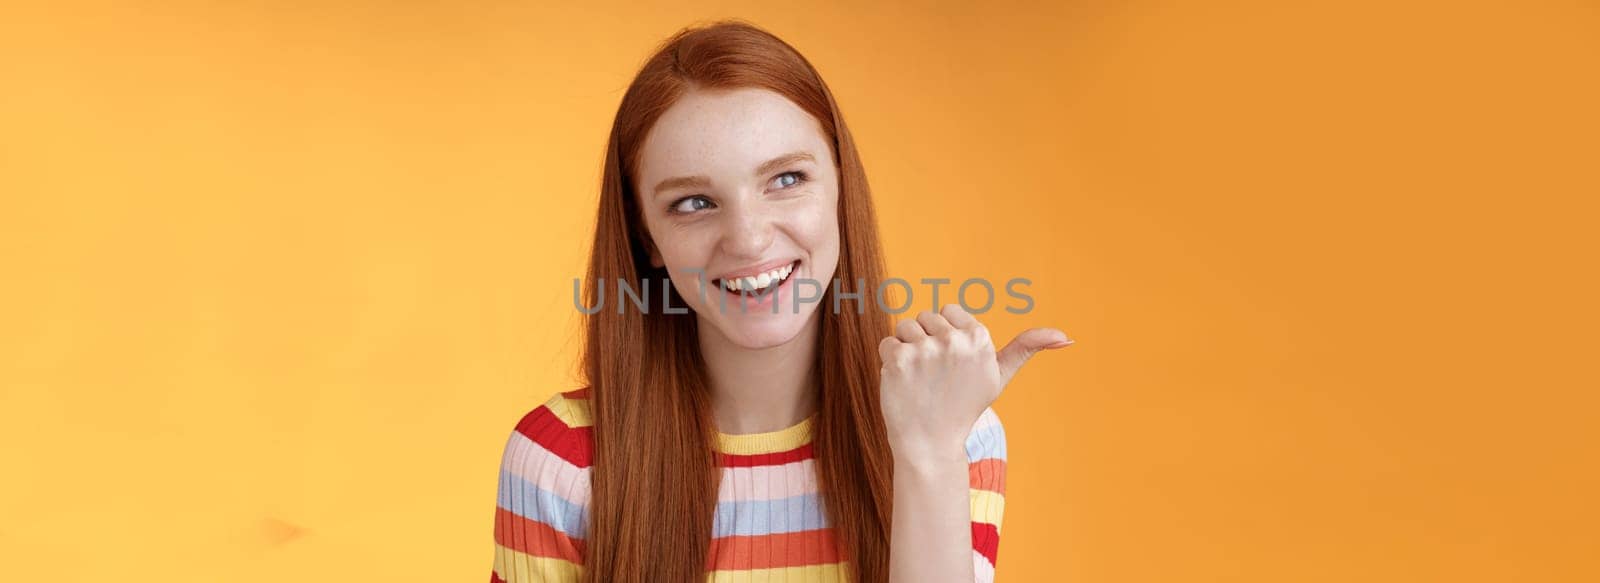 Amused outgoing redhead stylish female student discuss girly things smiling cheeky pointing handsome guy smirking devious pointing thumb looking intrigued curiously staring orange background.